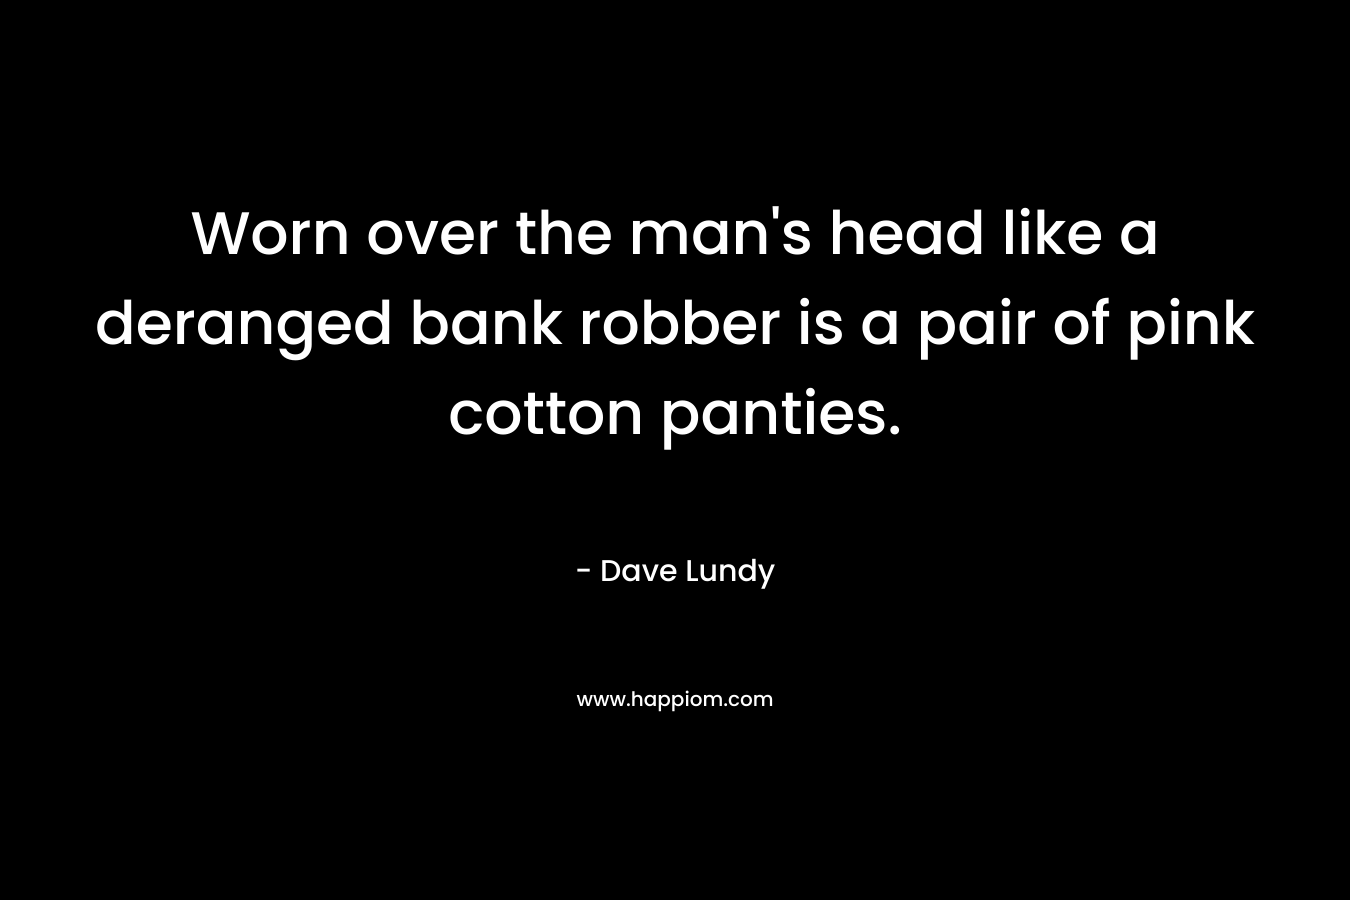 Worn over the man’s head like a deranged bank robber is a pair of pink cotton panties. – Dave Lundy